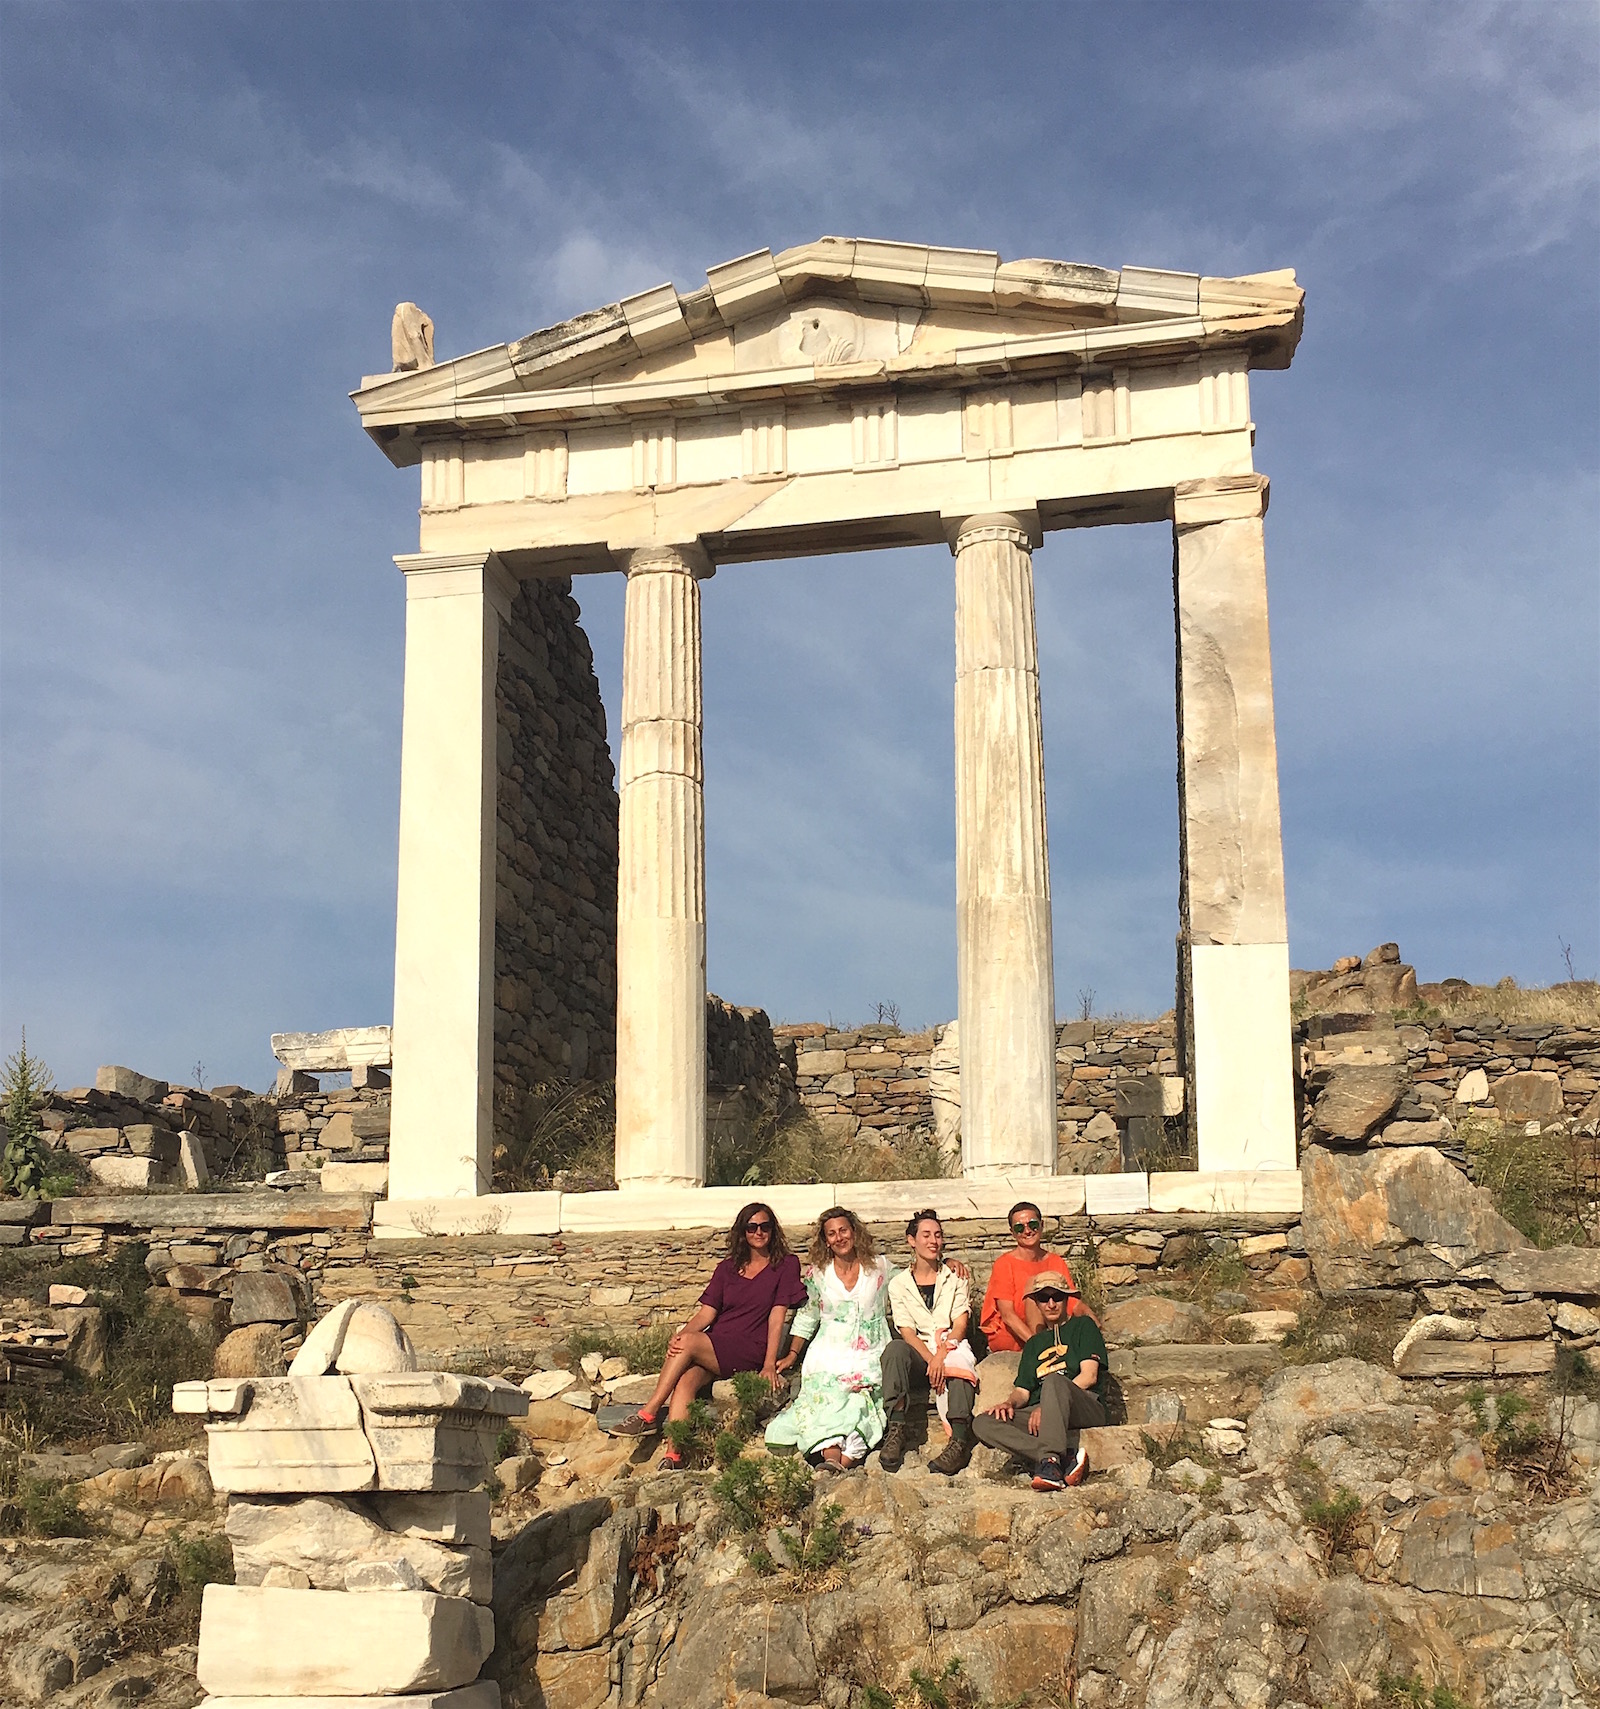 dreaming wide awake happiness retreat temple of Isis delos sacred island greece